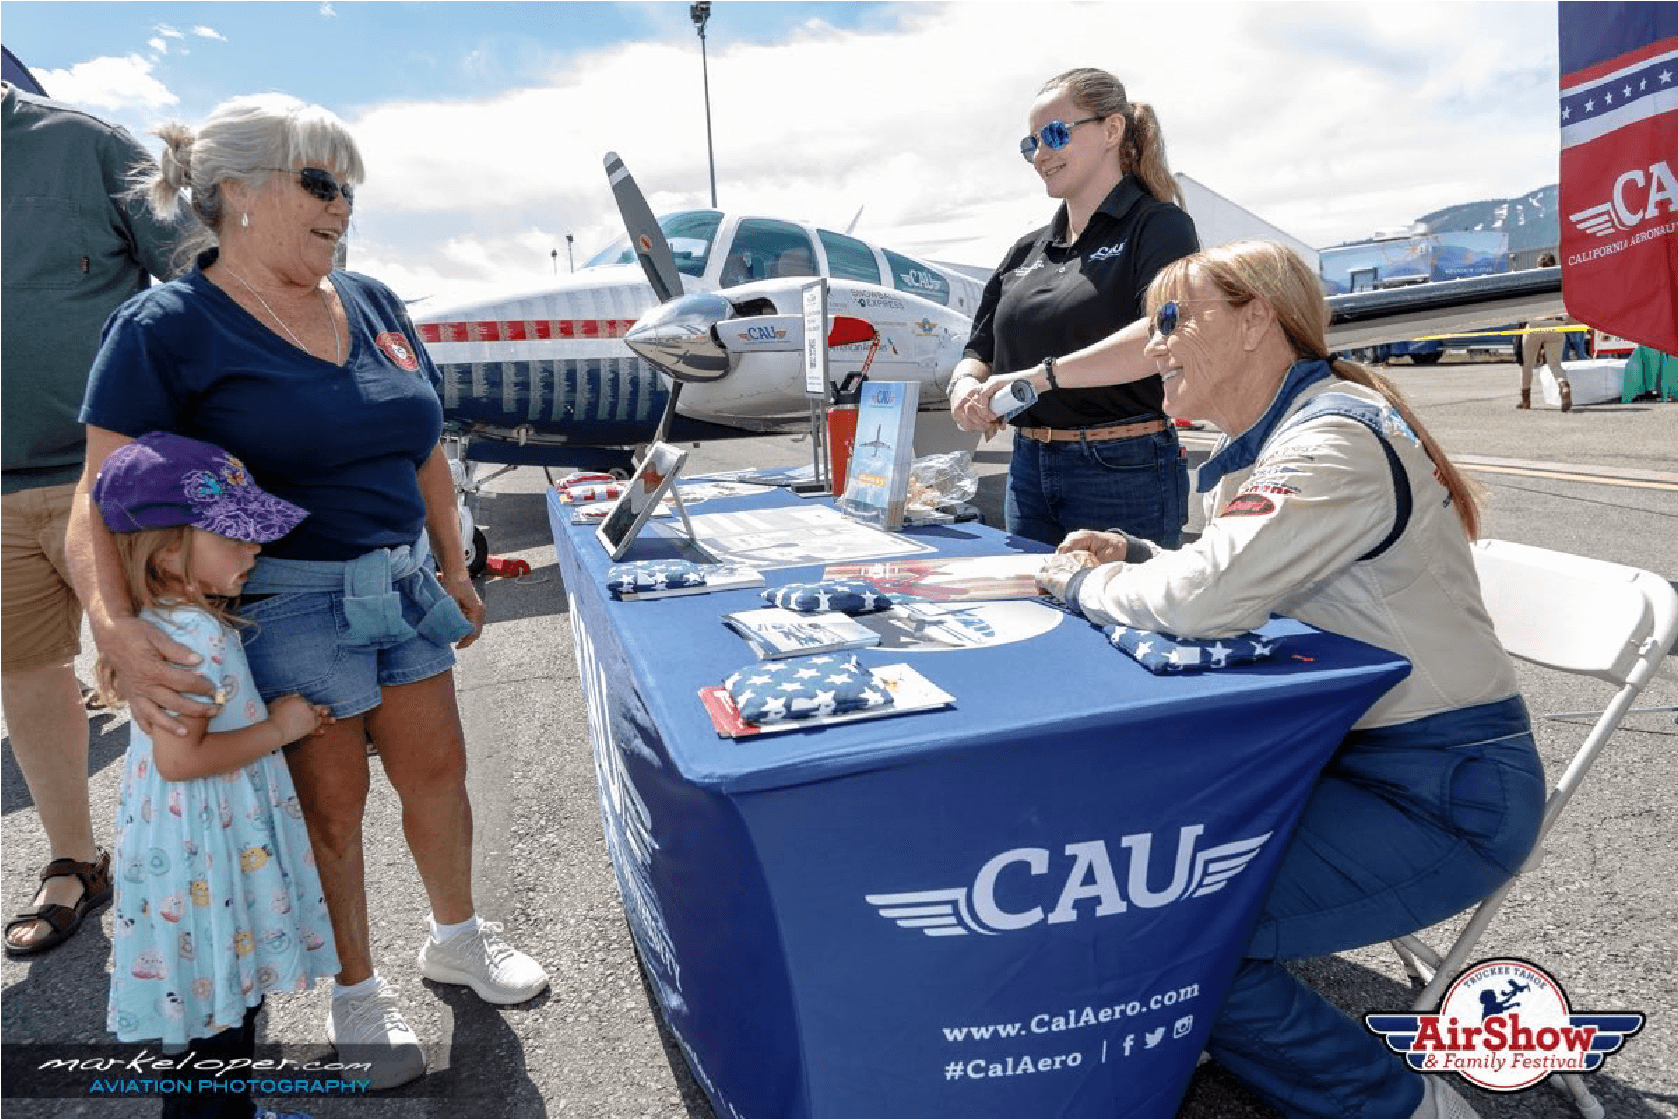 Vicky and CAU outreach at air show